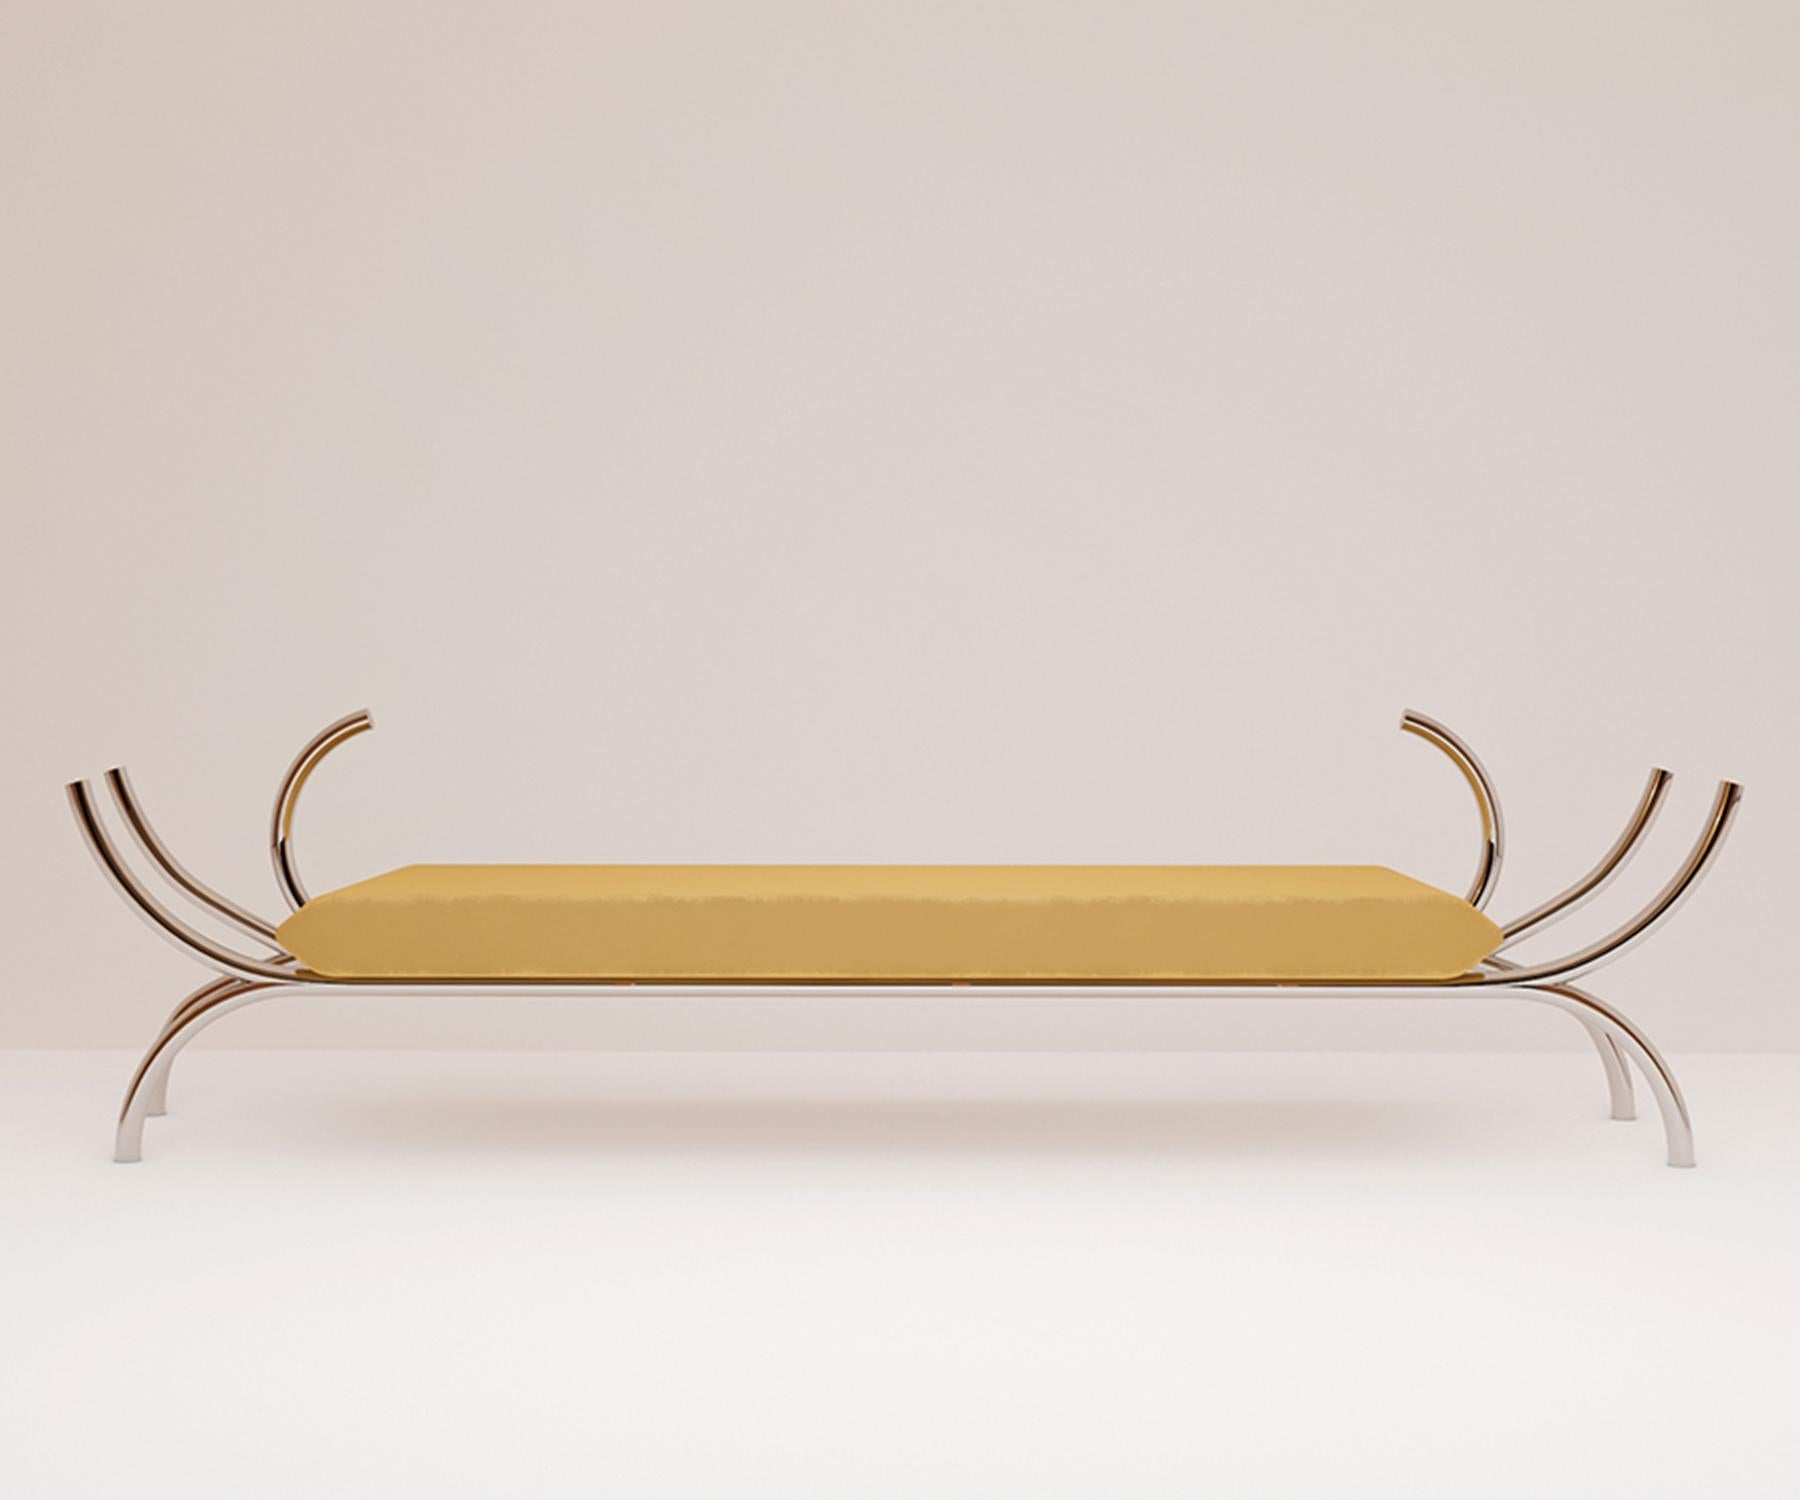 Statement bench with ten free arms, and geometric seat, inspired by ancient seats from oriental culture
Upholstered in a pleasing light yellow fabric.

Dimension. W 280 x D 70 x H 45 cm
Material. Velvet fabric seat, with steel legs.
 